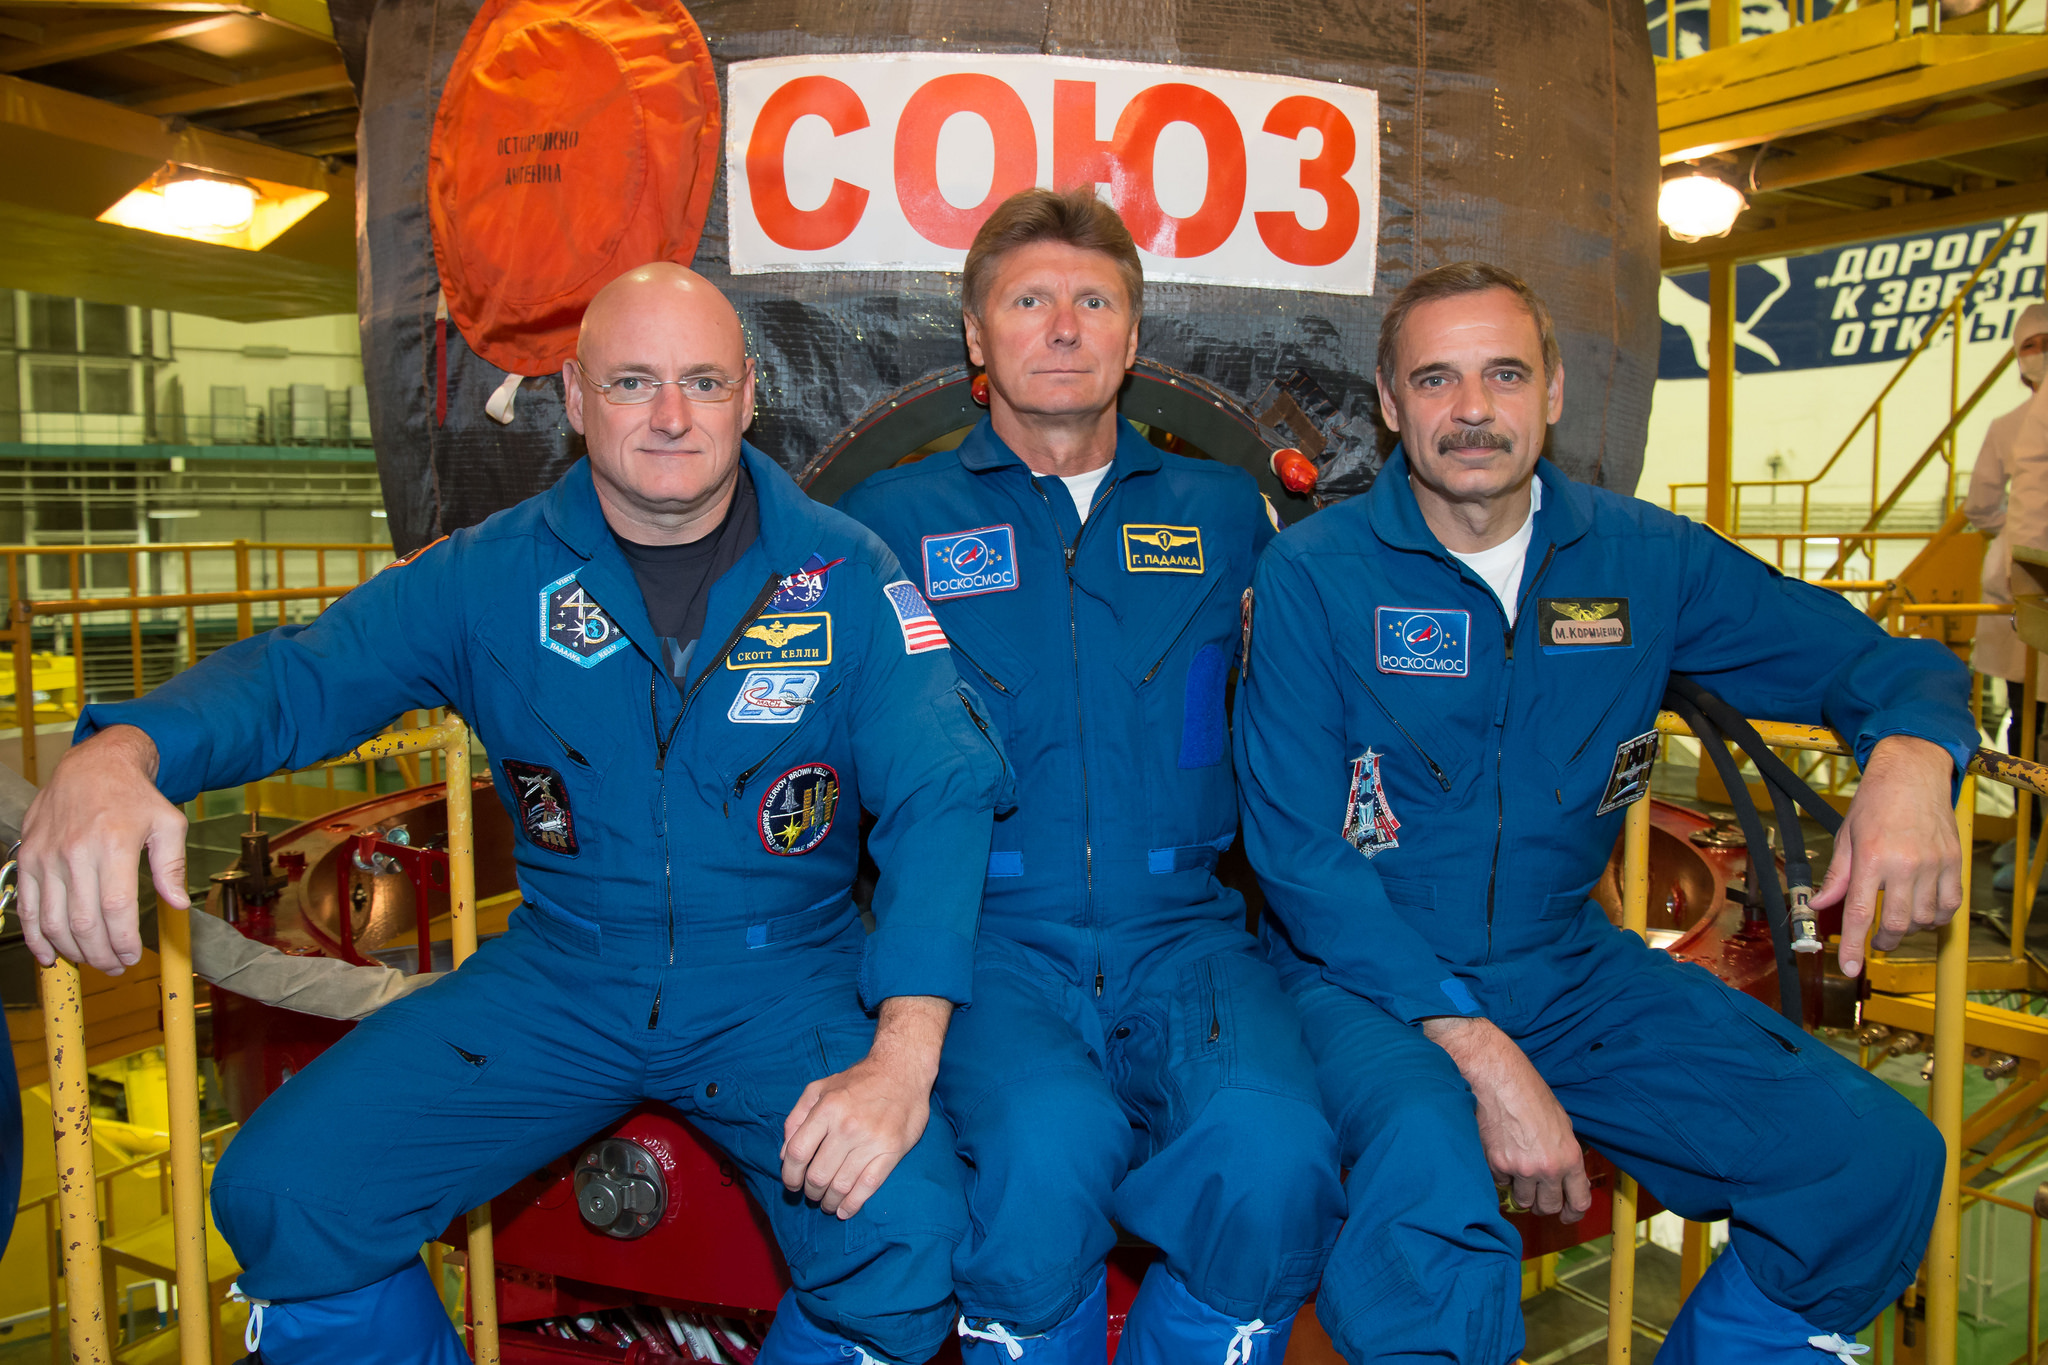 The Soyuz TMA-16M crew, scheduled to launch on 27 March 2015, includes Gennadi Padalka (center), who will become the world space endurance record-holder by the end of his six-month stay aboard the International Space Station (ISS). Flanking him are the two year-long crew members, Scott Kelly (left) and Mikhail Kornienko, who will catapult themselves into the Top Twenty most seasoned spacefarers of all time. Photo Credit: NASA